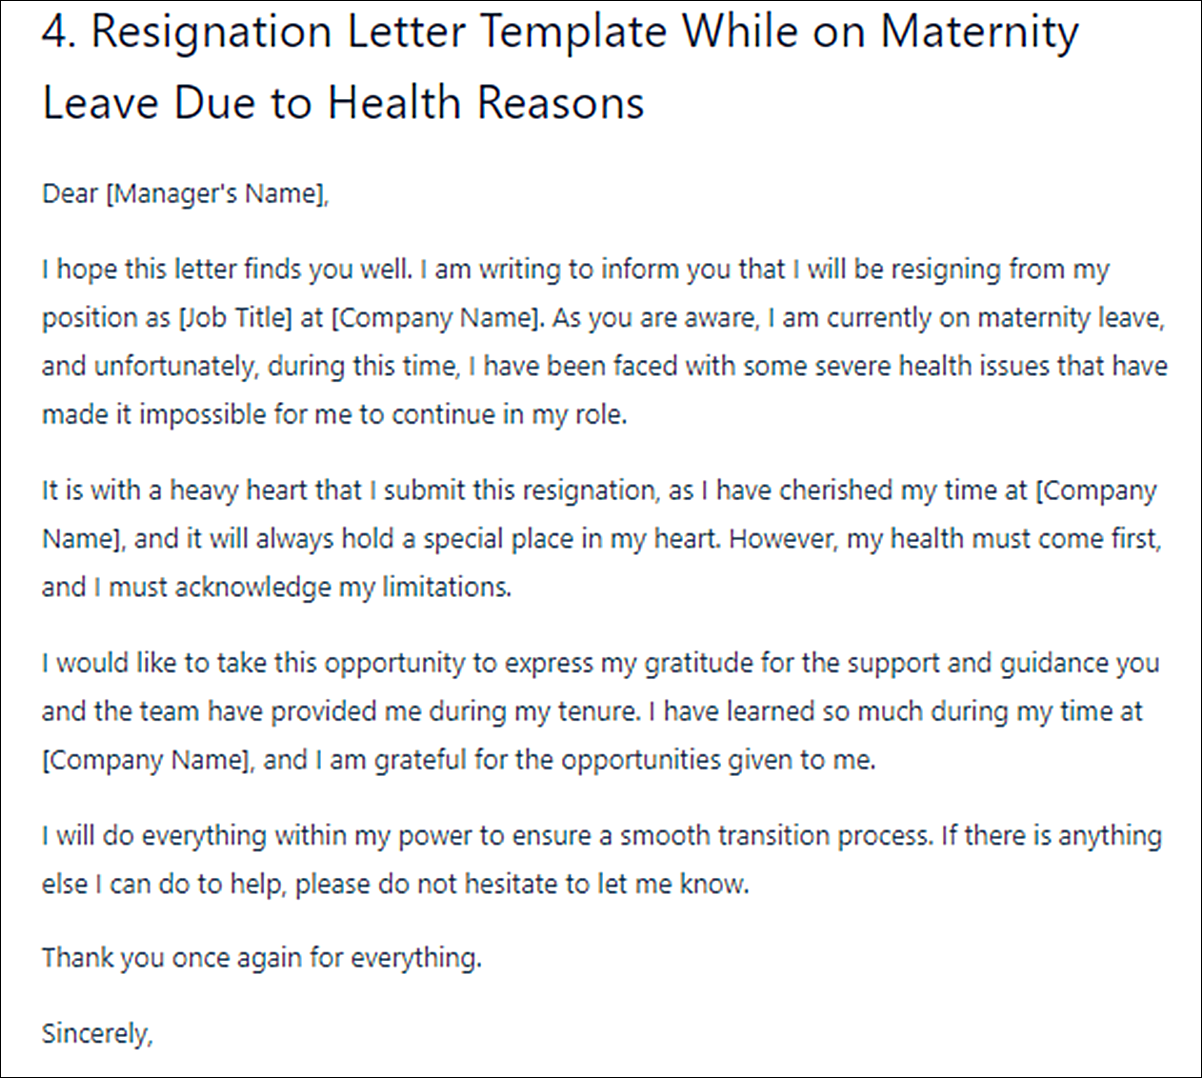 Resignation Letter Template While on Maternity Leave Your Ultimate Guide